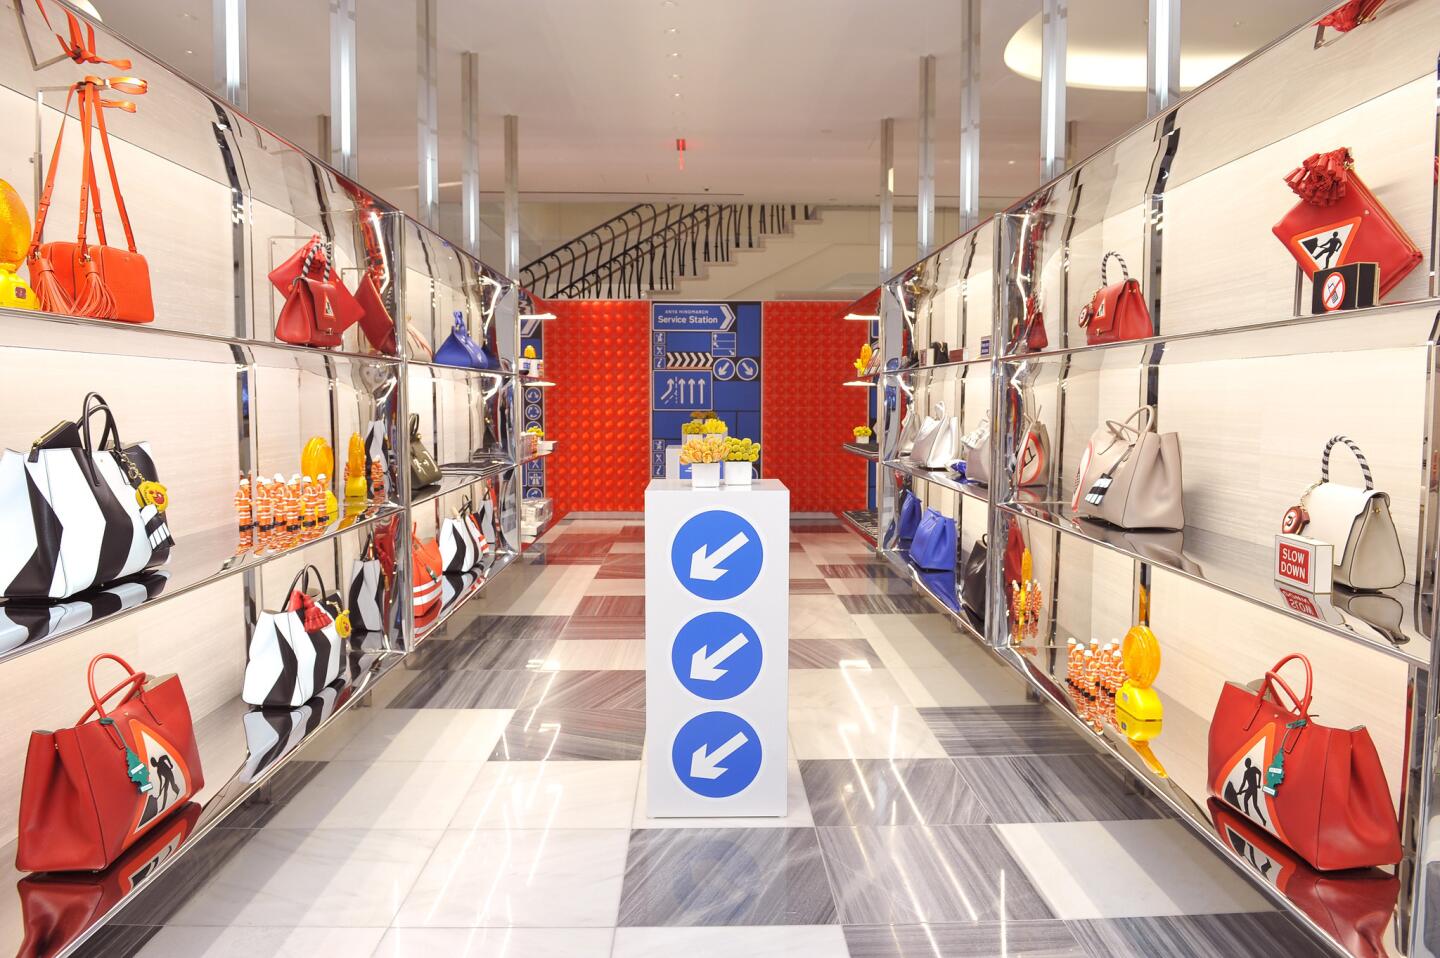 Barneys New York Celebrates the Anya Hindmarch Service Station Collection